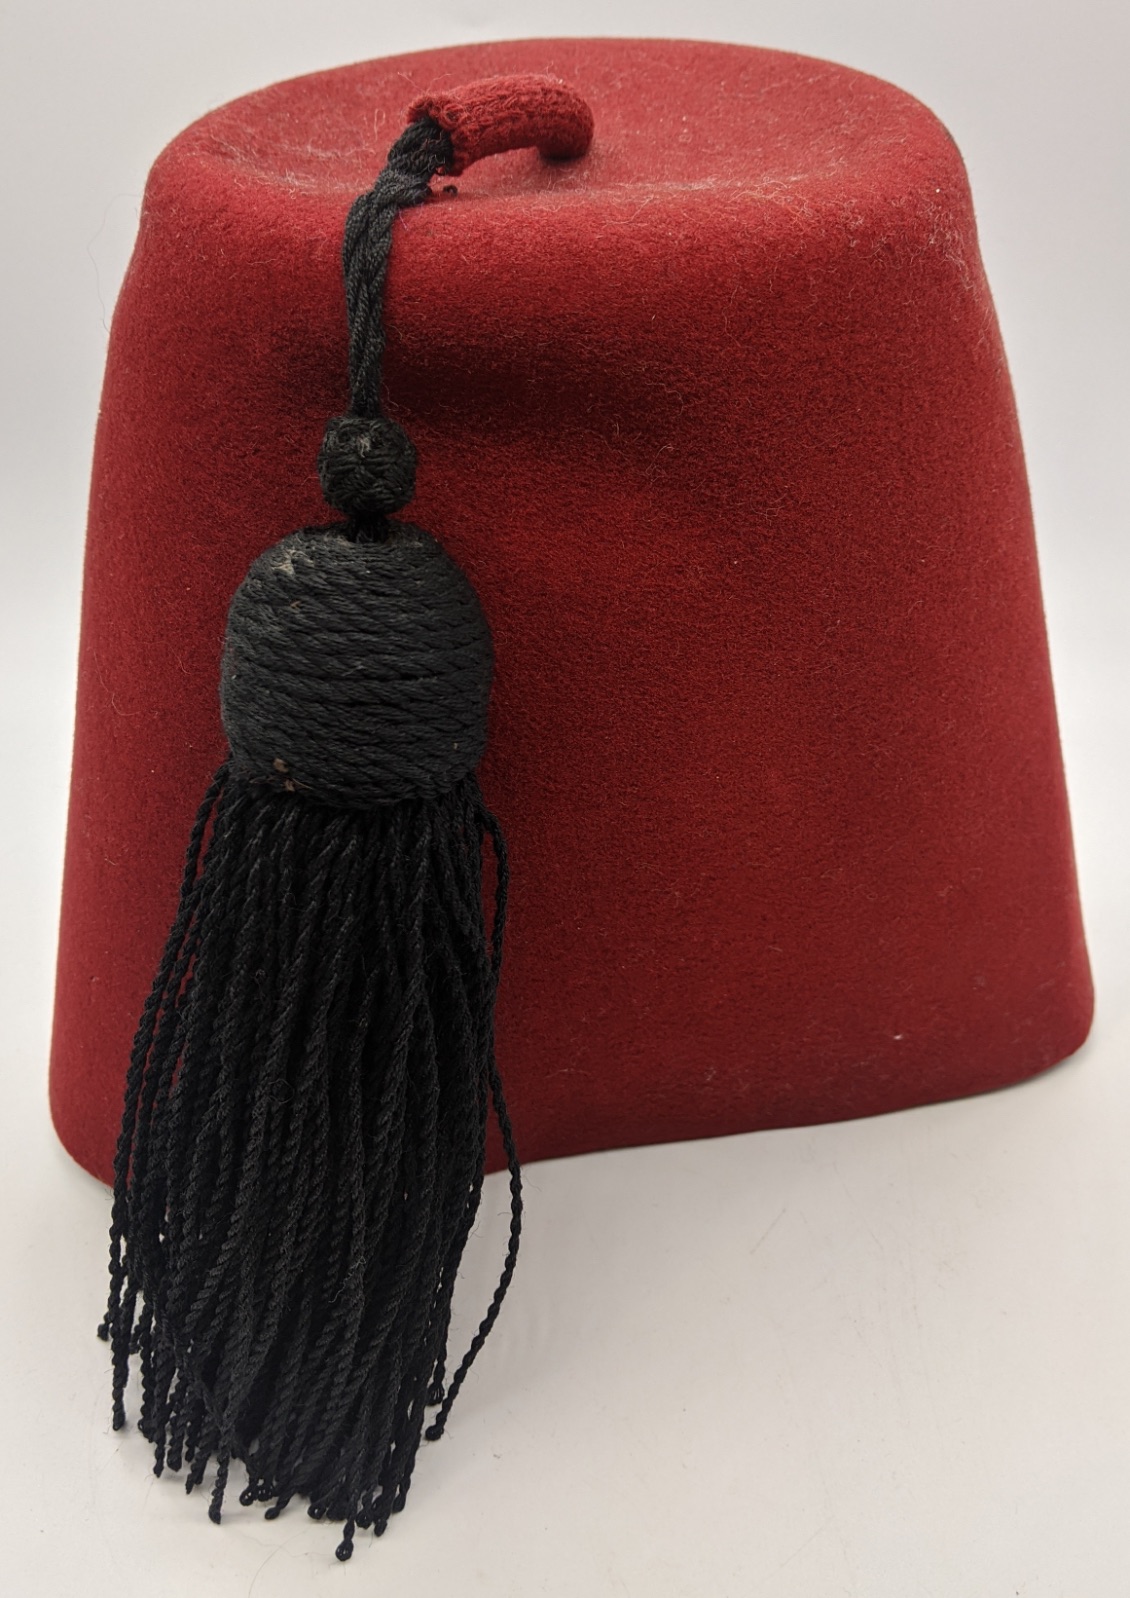 An early 20th century fez hat